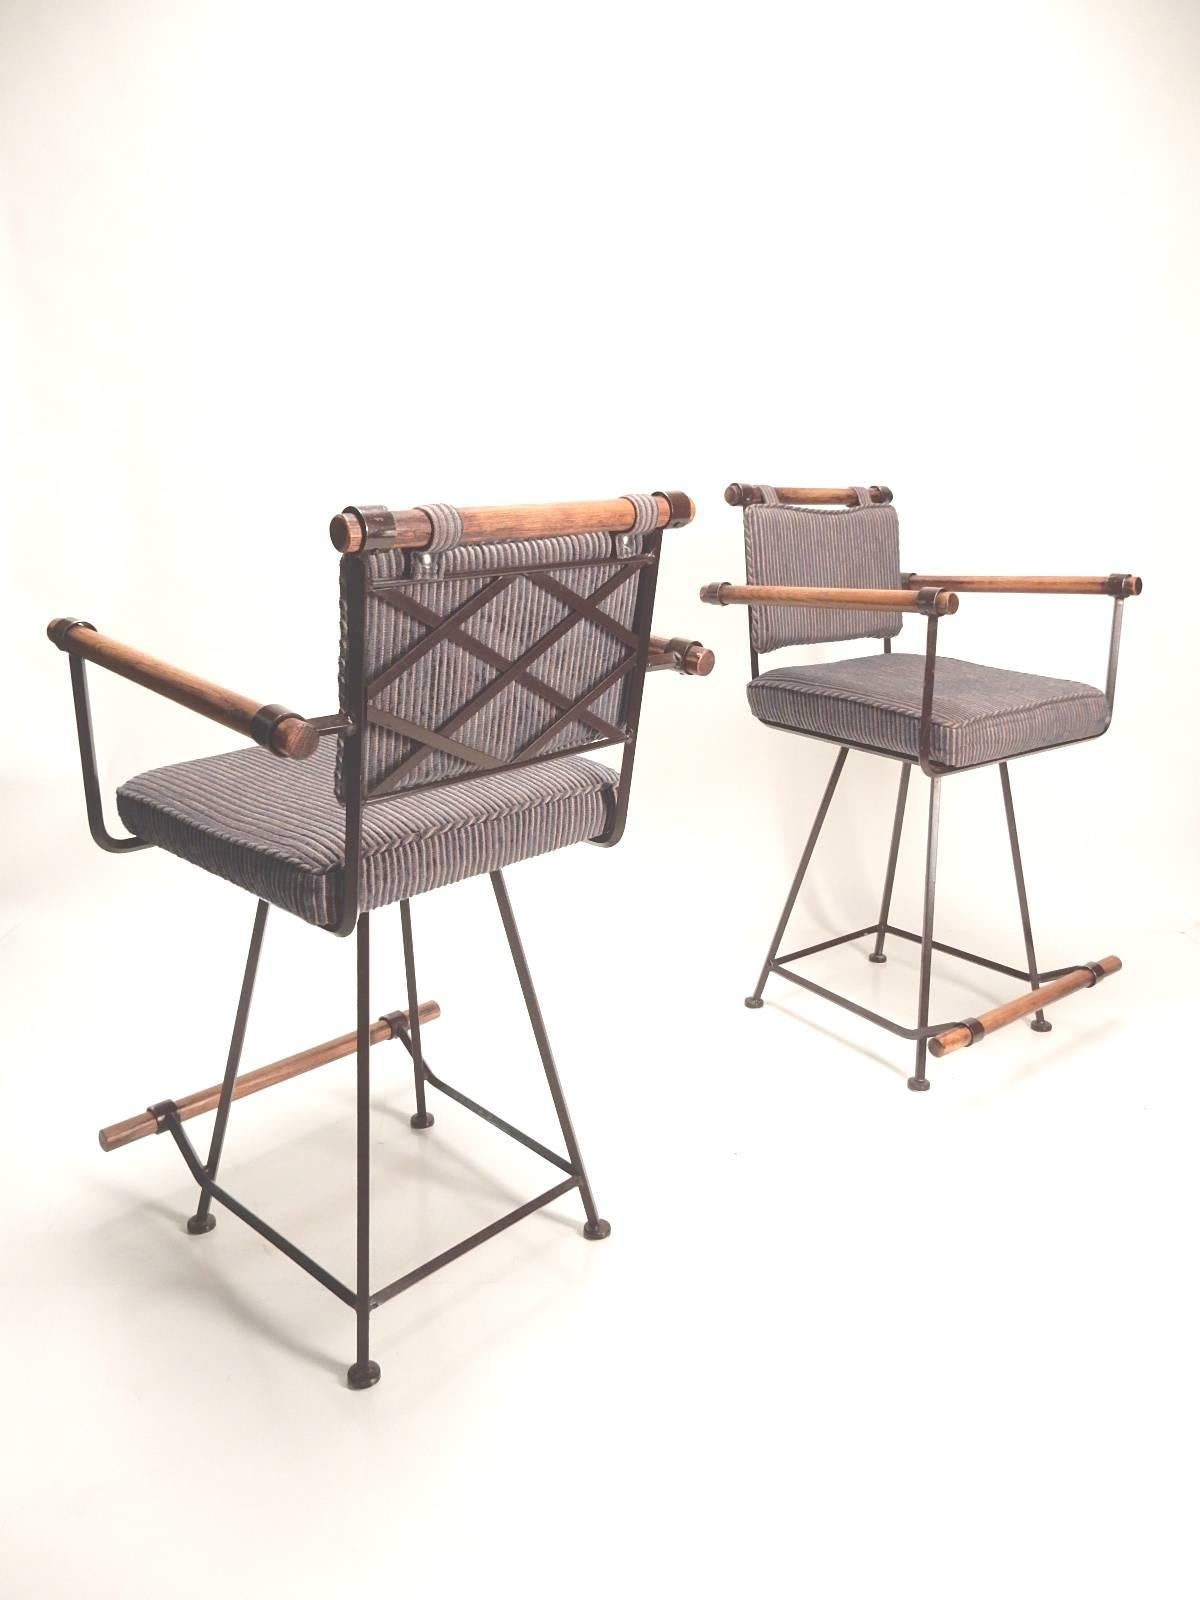 Southern California Modernism at its finest, these three wood and iron bar stools were designed by Cleo Baldon, circa 1964.
Manufactured by Inca Products of Santa Fe Springs, CA.
They are in excellent condition and completely original.